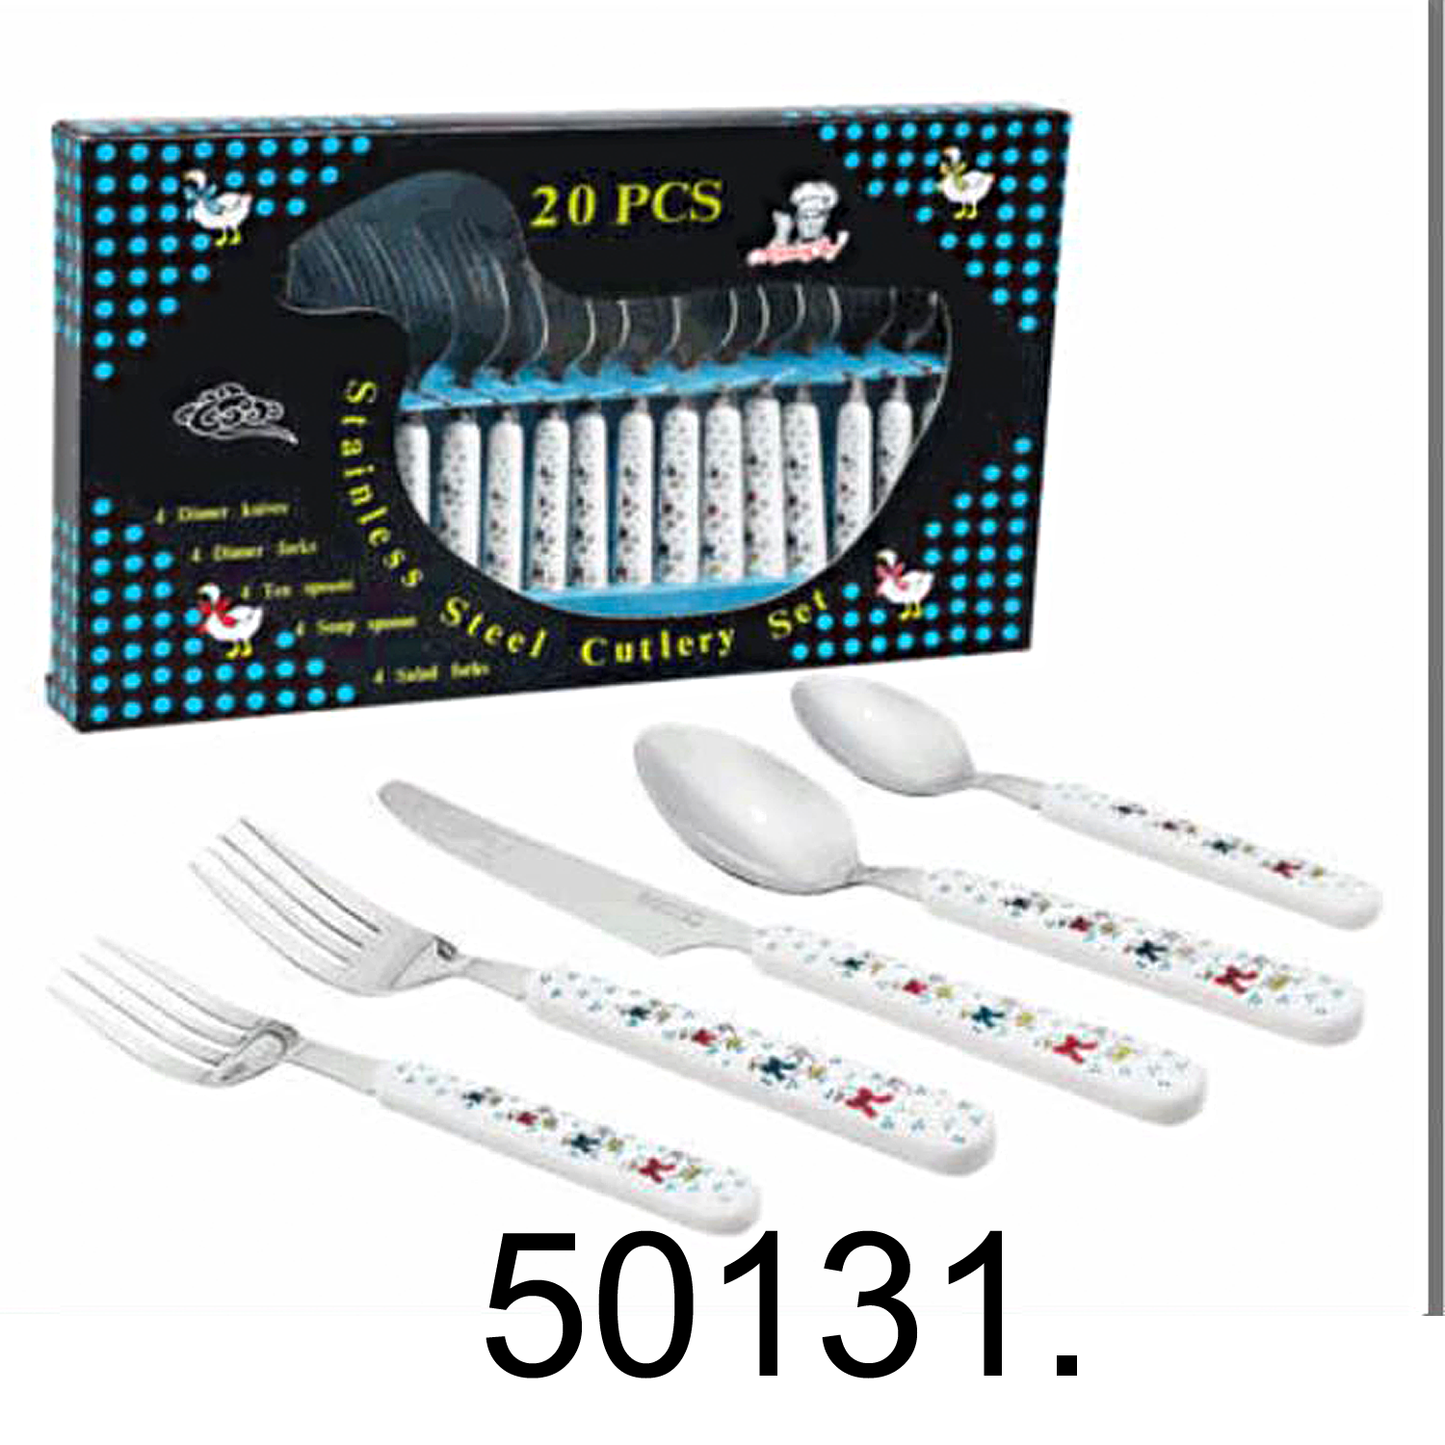 20 Pcs Stainless Steel Cutlery Set.